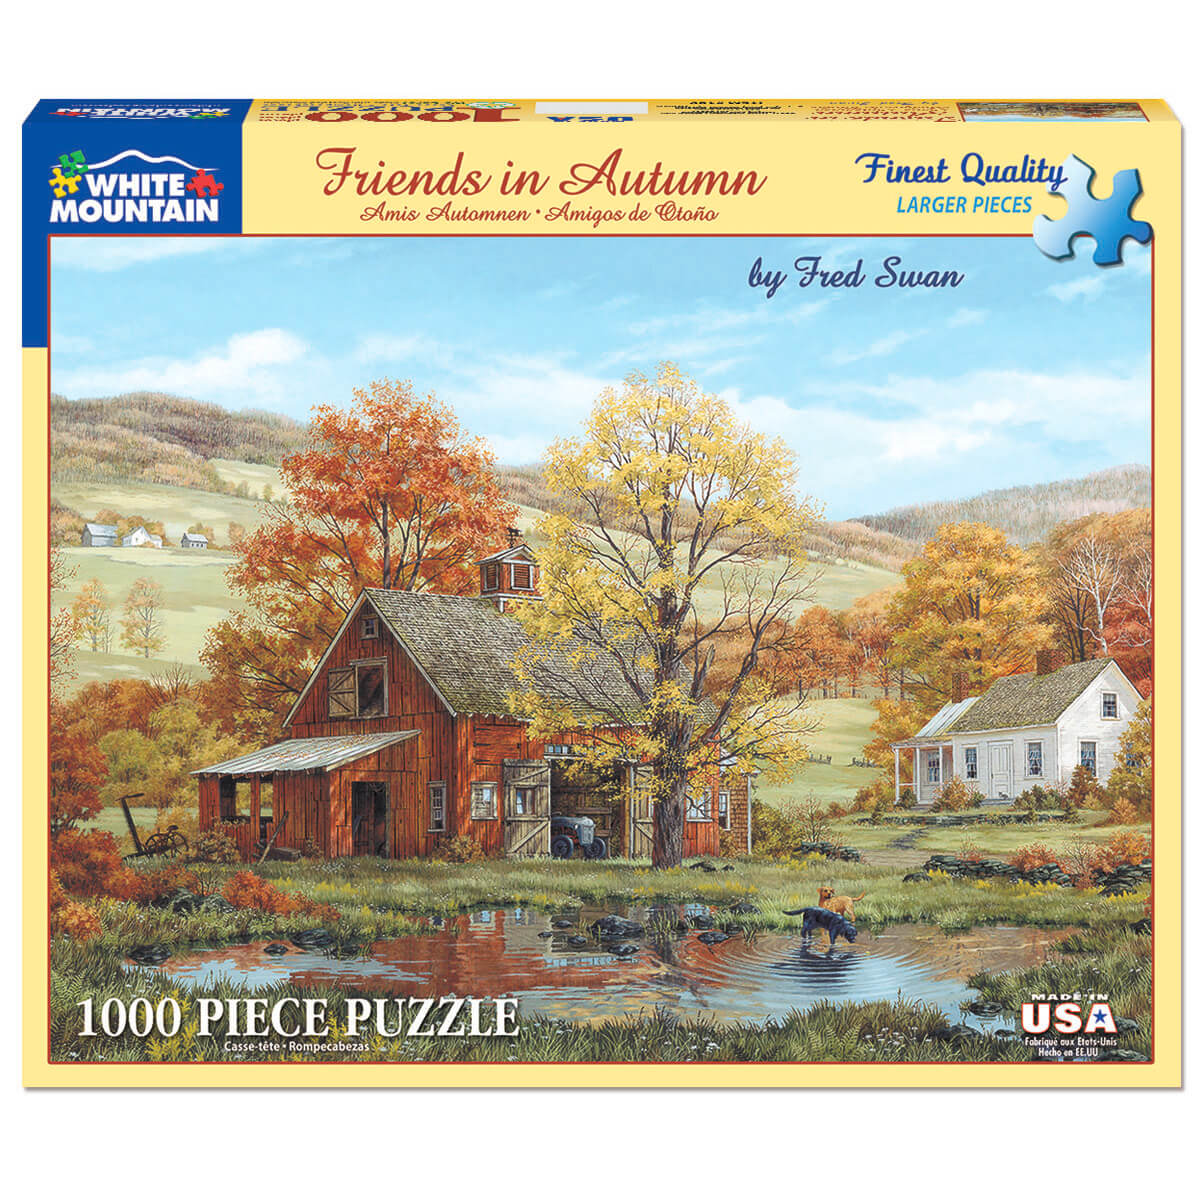 White Mountain Puzzles Friends in Autumn 1000 Piece Jigsaw Puzzle